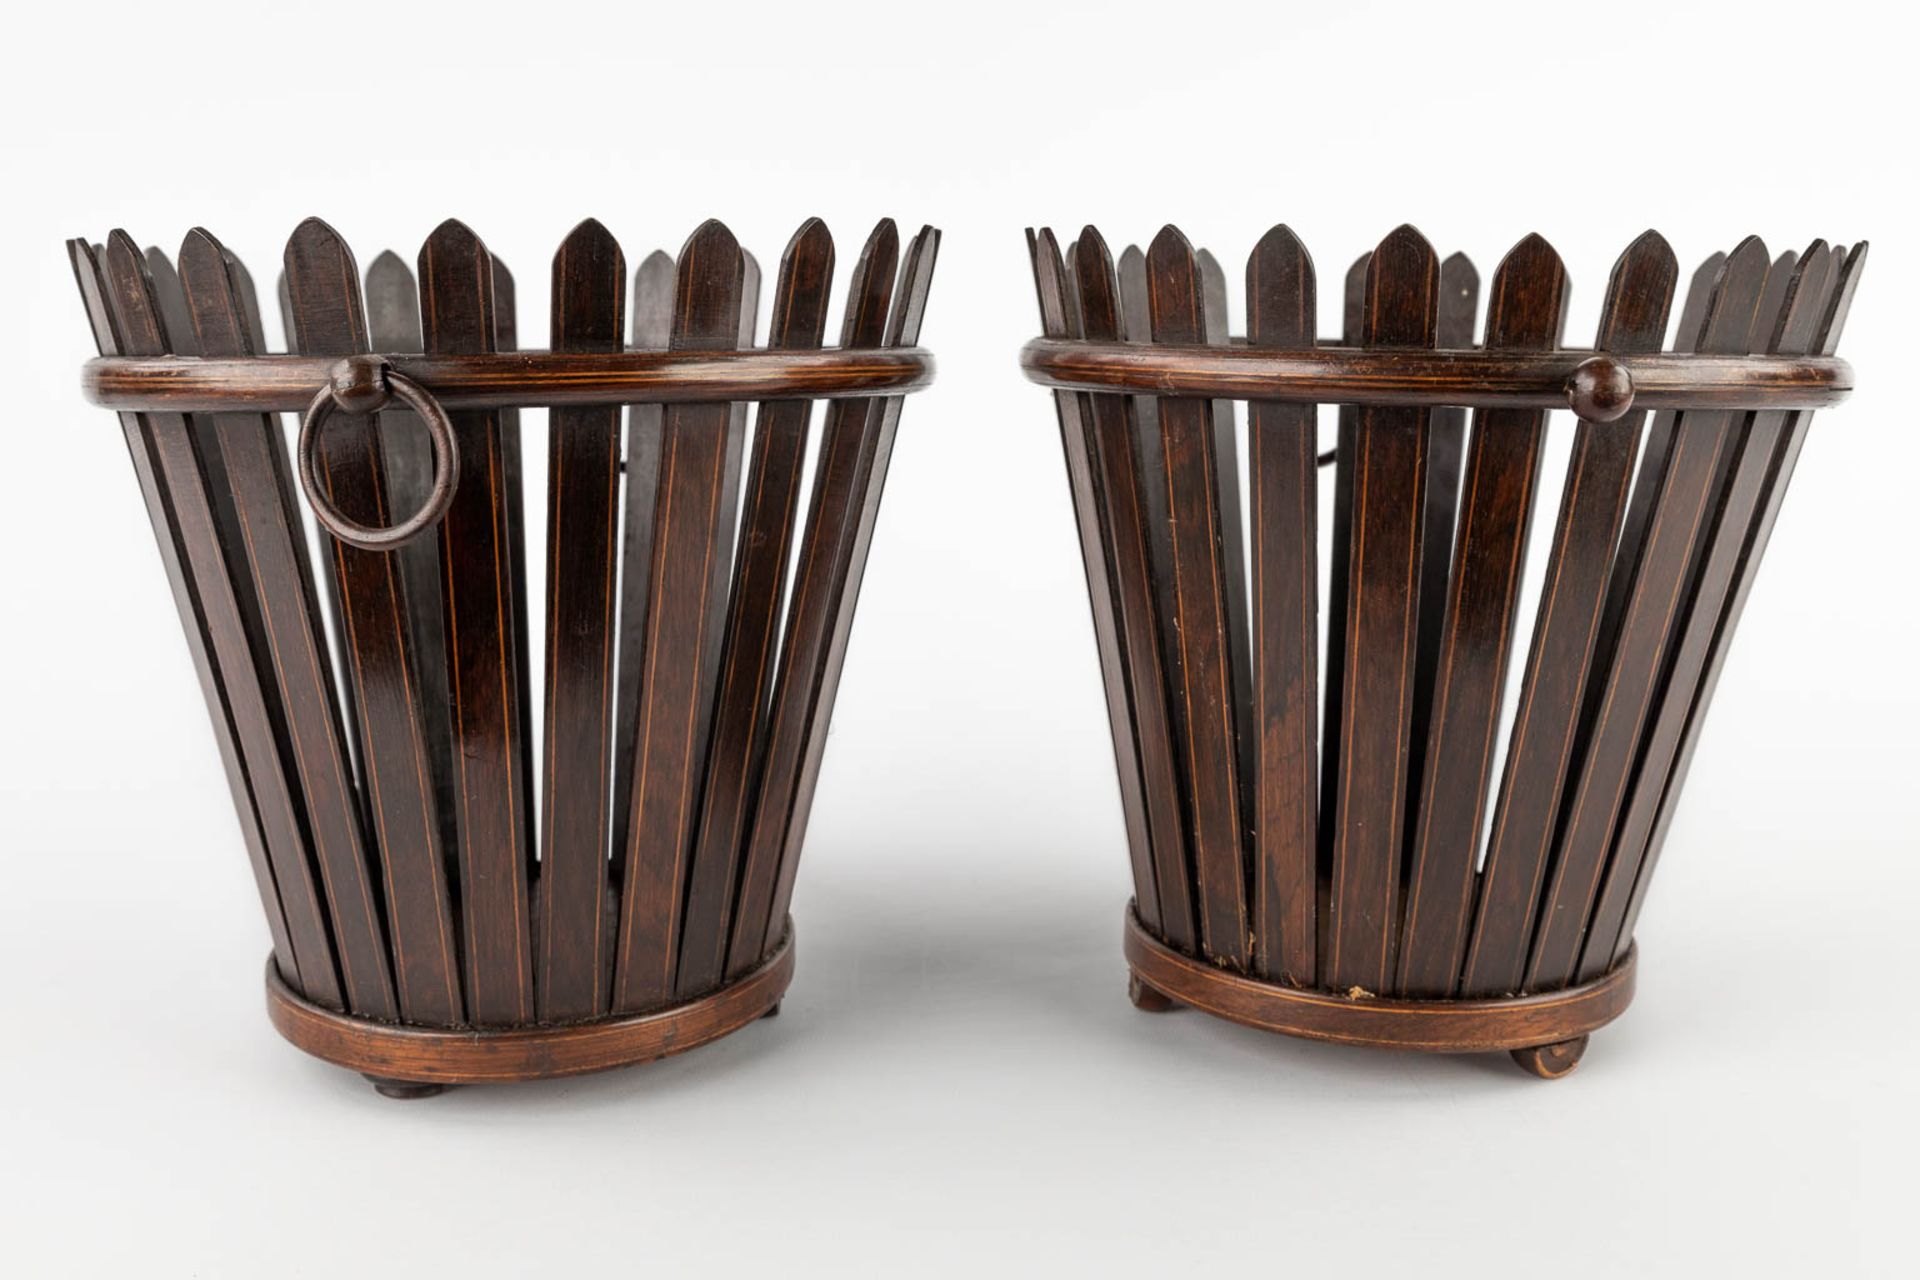 A pair of Edwardian flower baskets, mahogany, England. (H:21 x D:23 cm) - Image 6 of 11